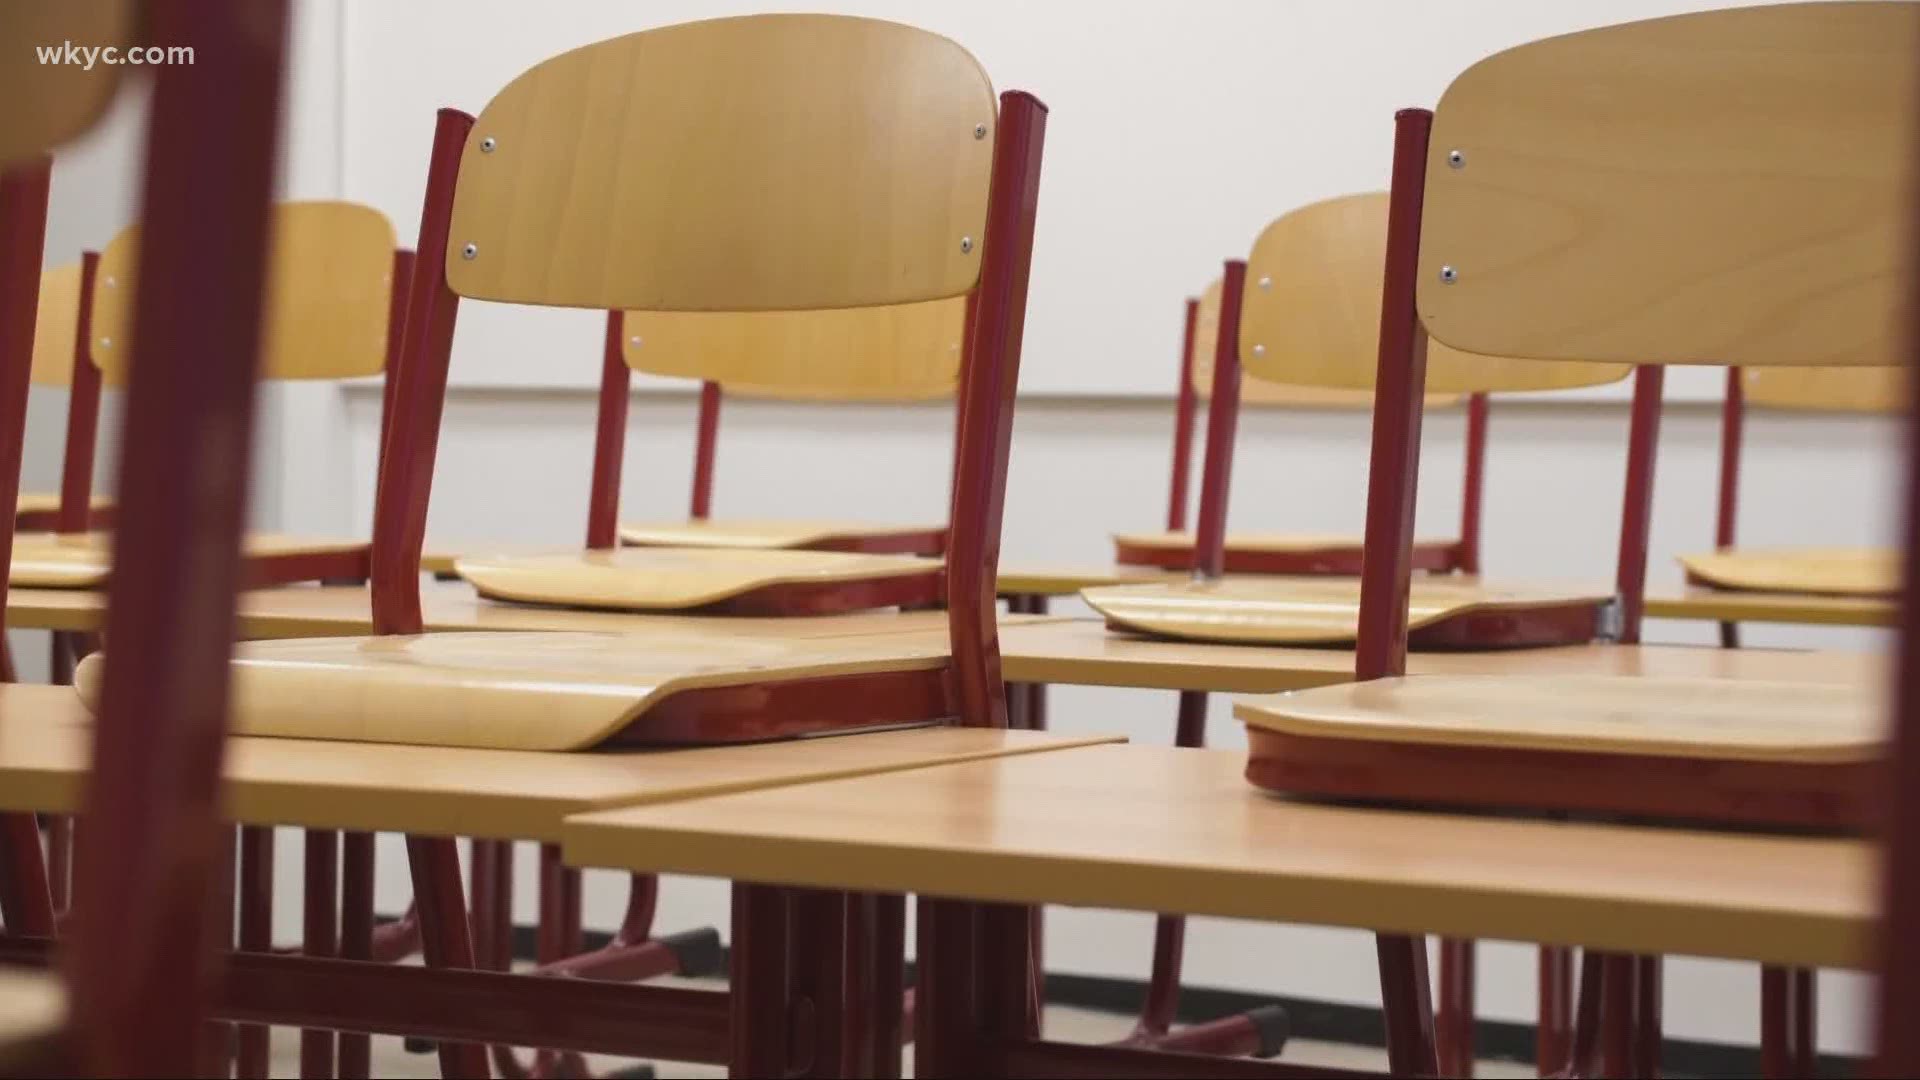 Back to school and the law. Lynna Lai reports how some school leaders could face legal action over the decision to let students back in the classroom.